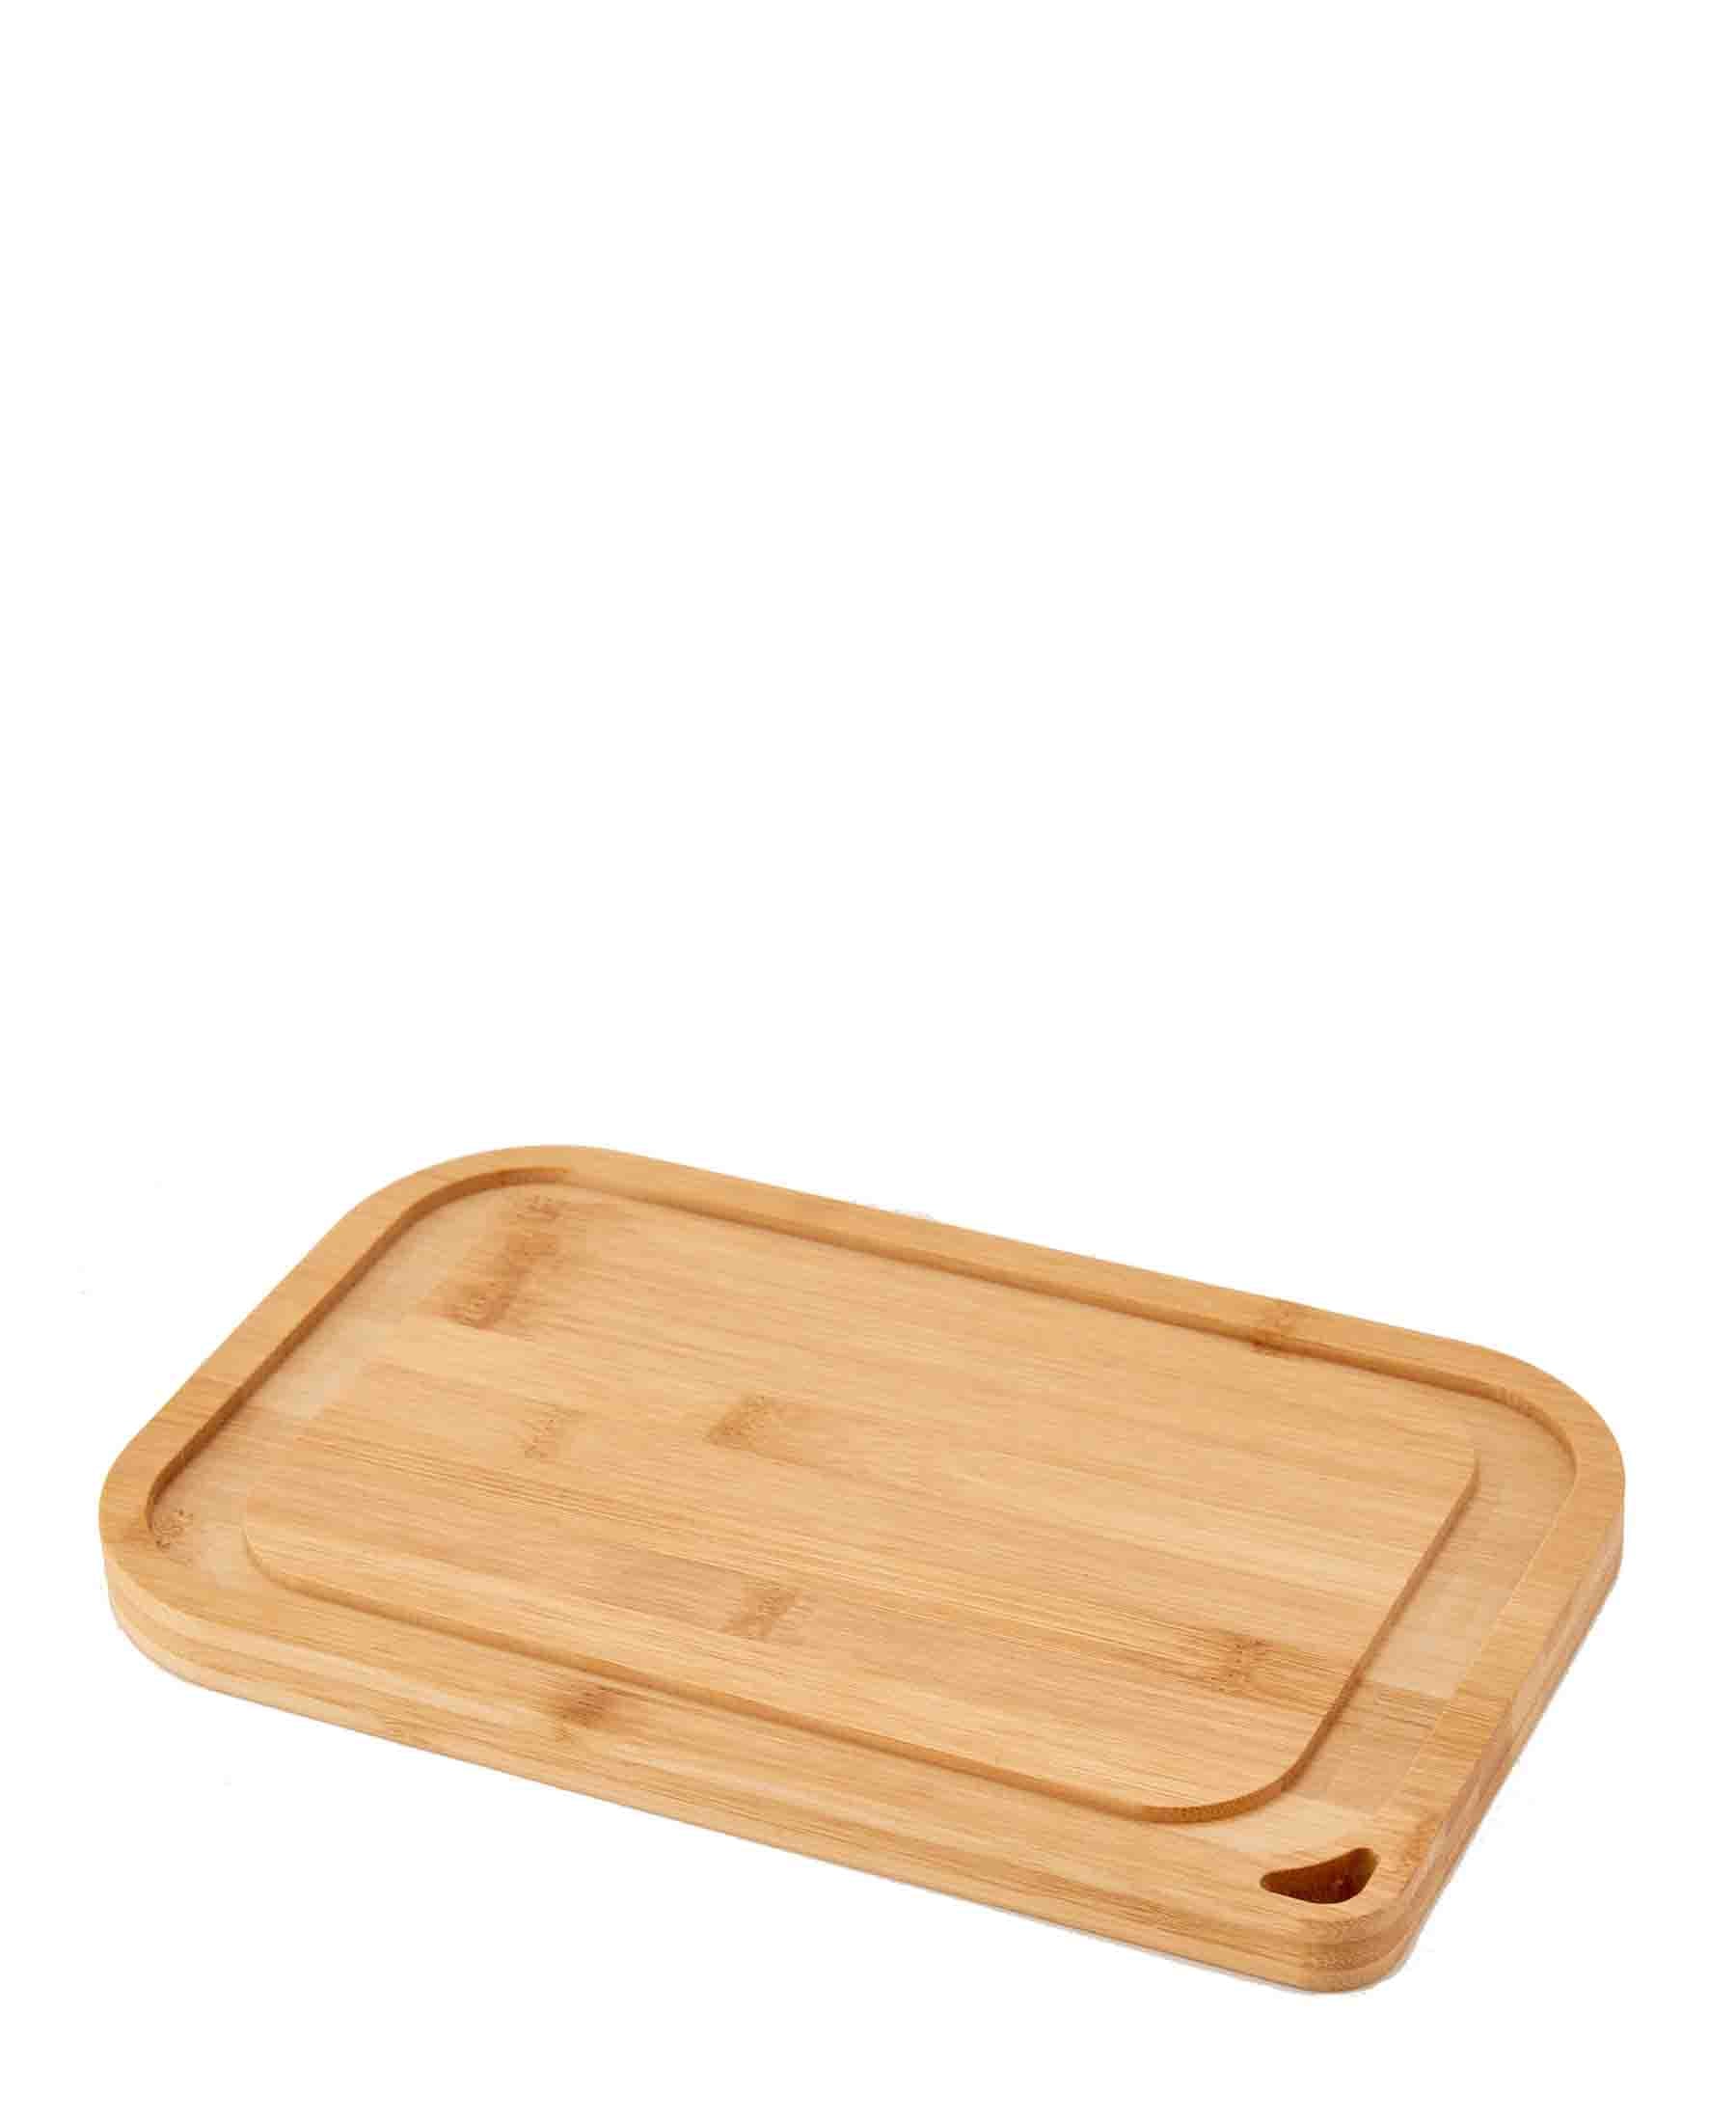 Aqua Rectangular Glass Baking Tray with Bamboo Lid - Clear